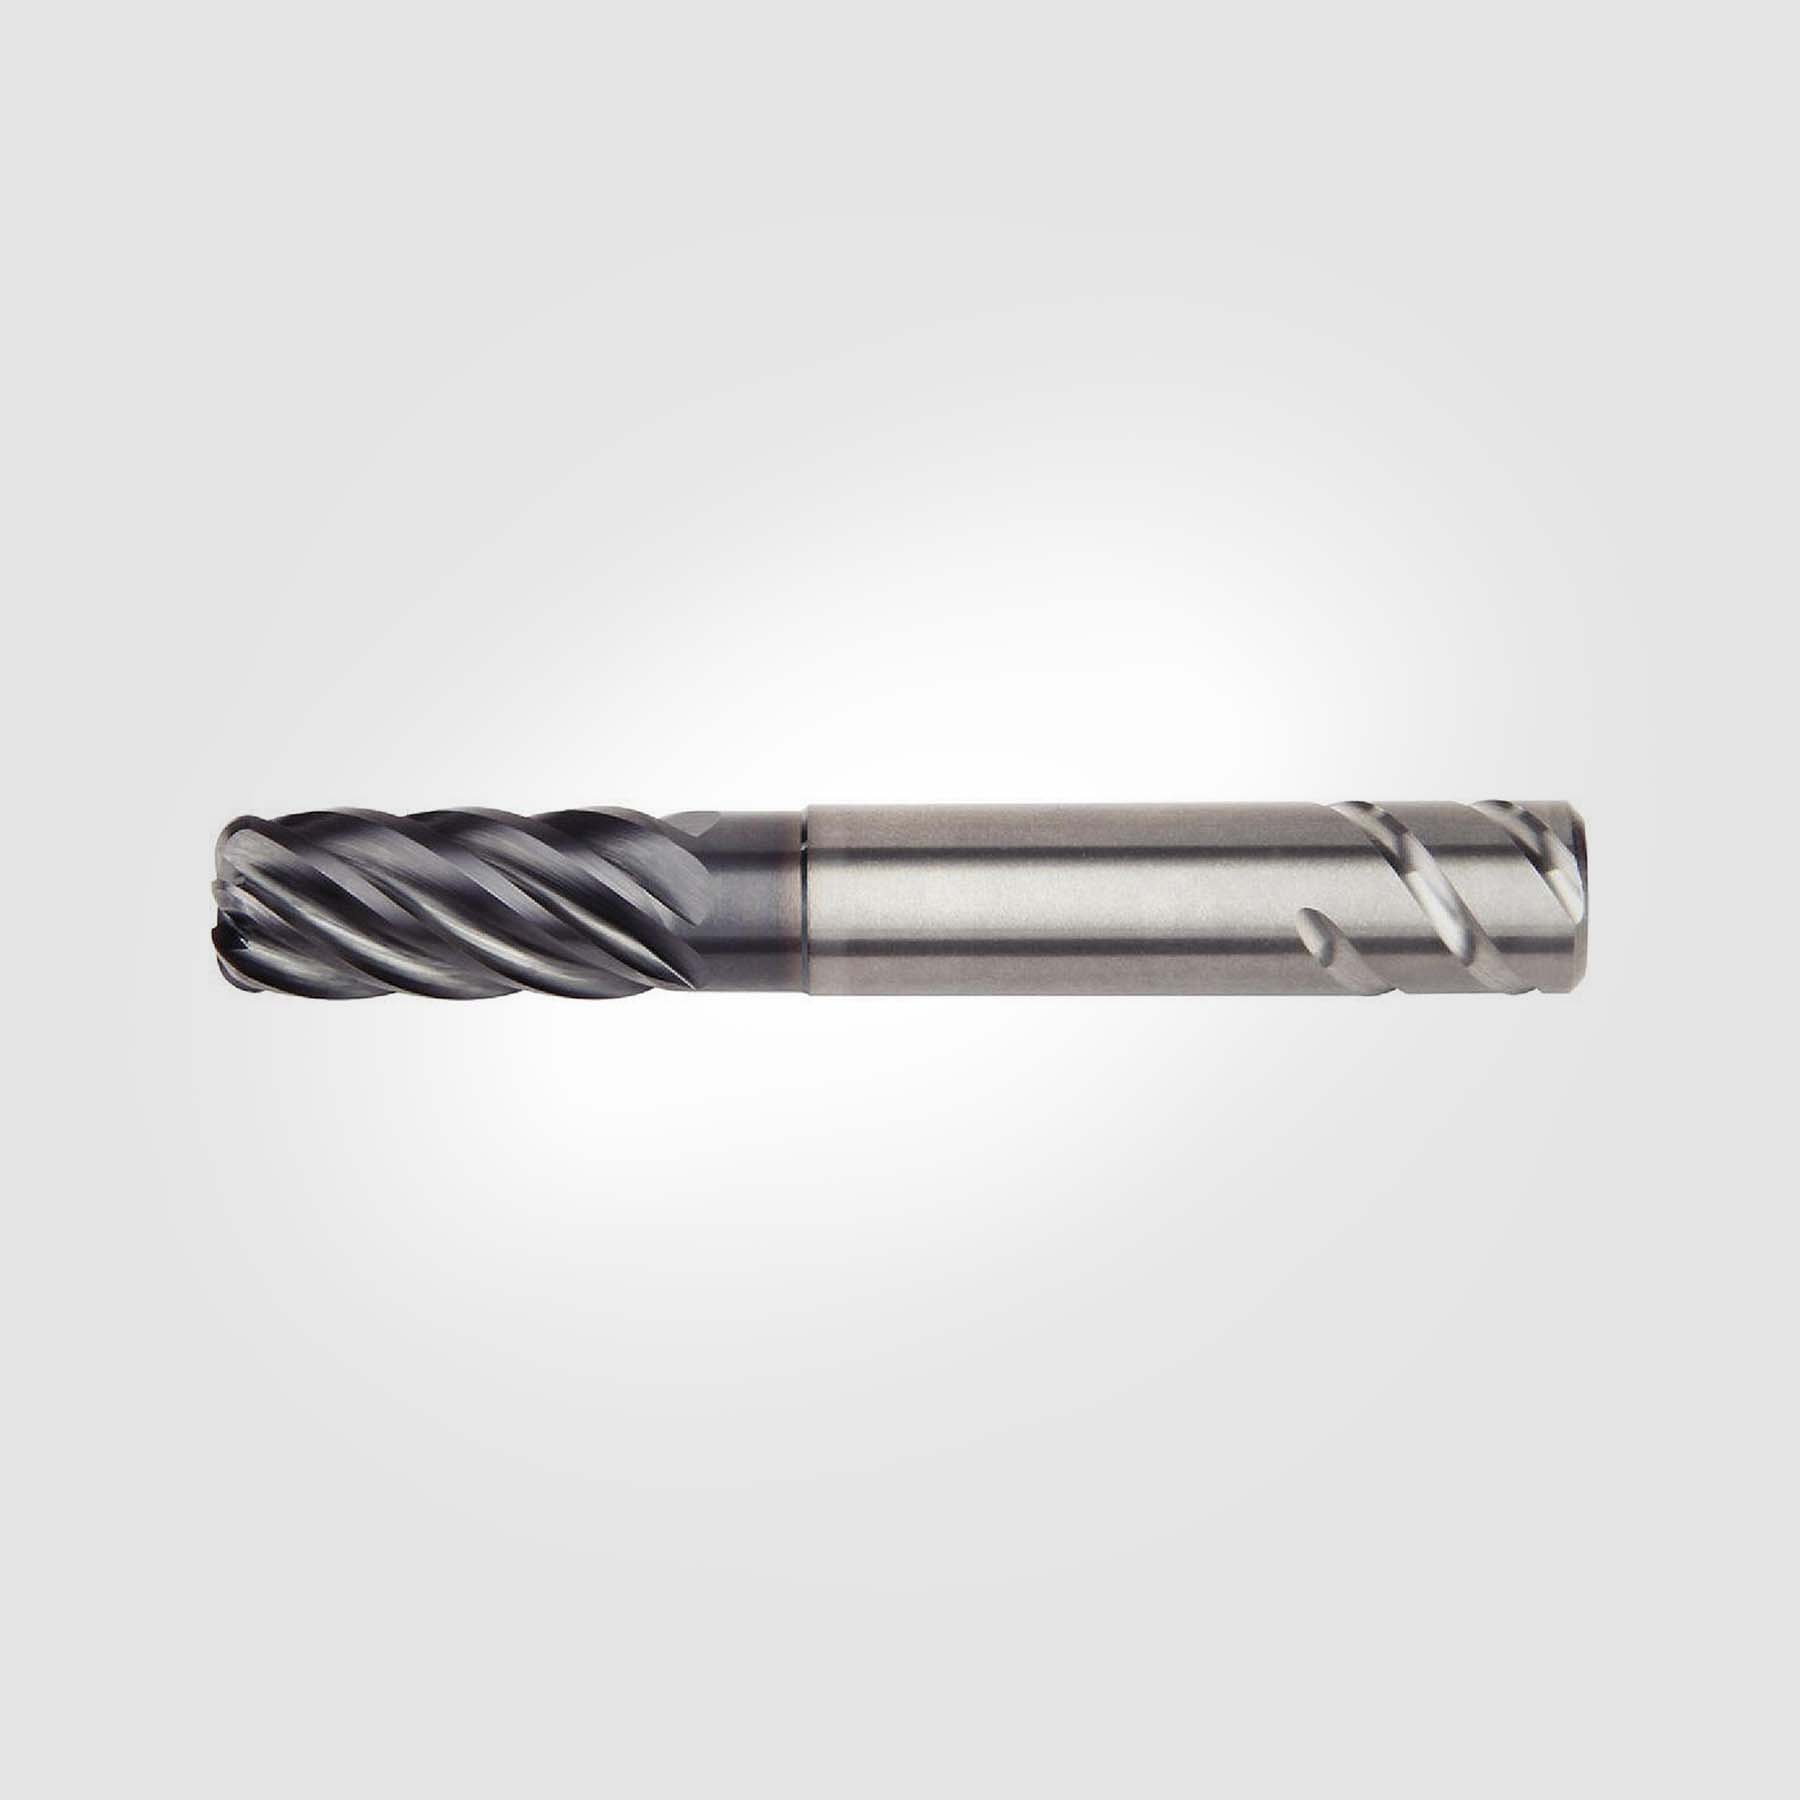 HARVI III | 3/4" x 3/4" x 1 1/2" x 5 1/2" | SOLID CARBIDE NECKED ENDMILL 6 FLUTE | 5351898